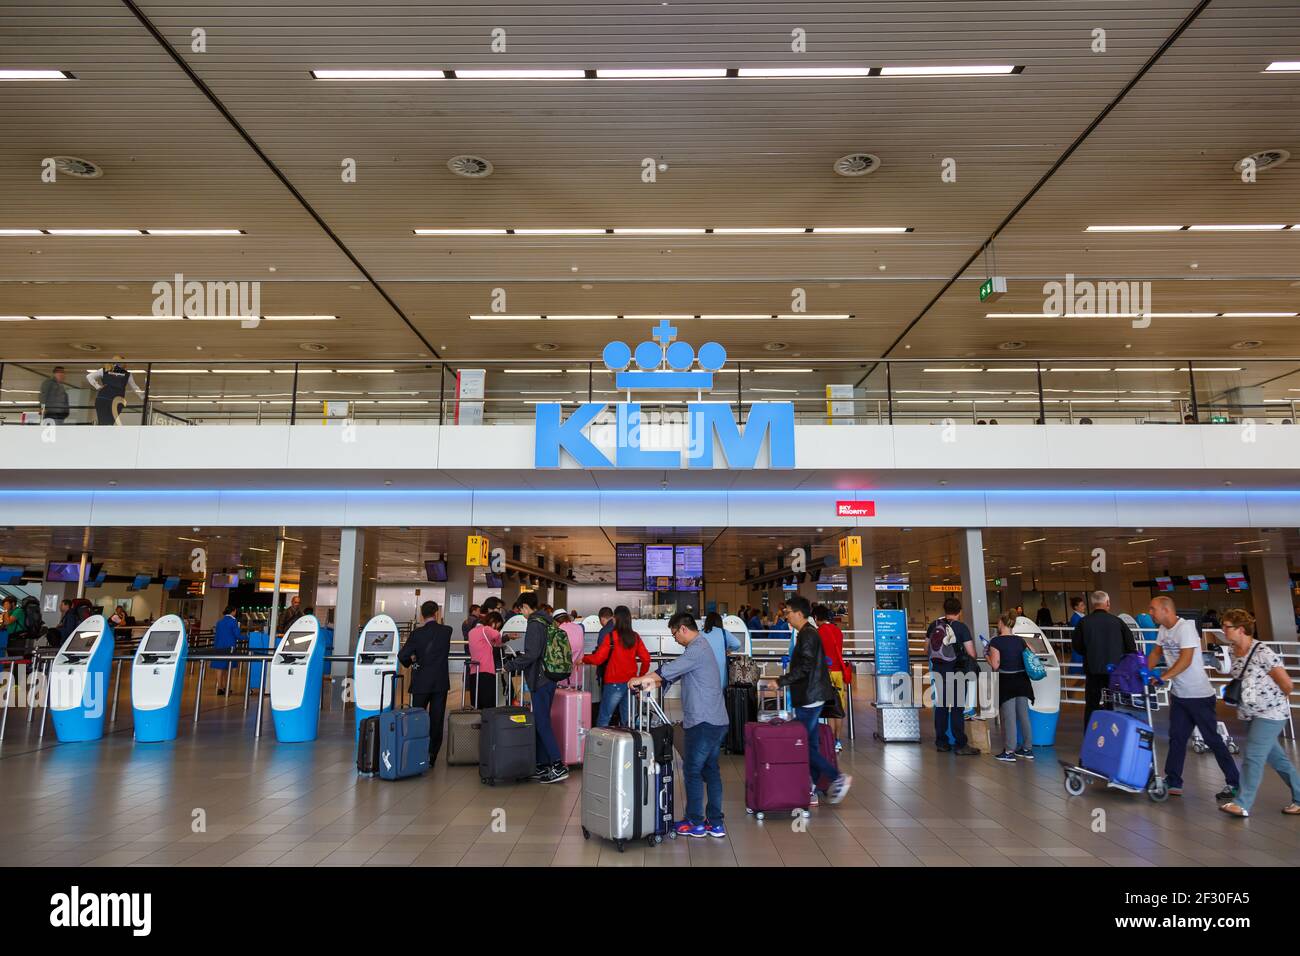 Amsterdam, Netherlands - September 22, 2016: Amsterdam Schiphol Airport Terminal (AMS) in the Netherlands. Stock Photo